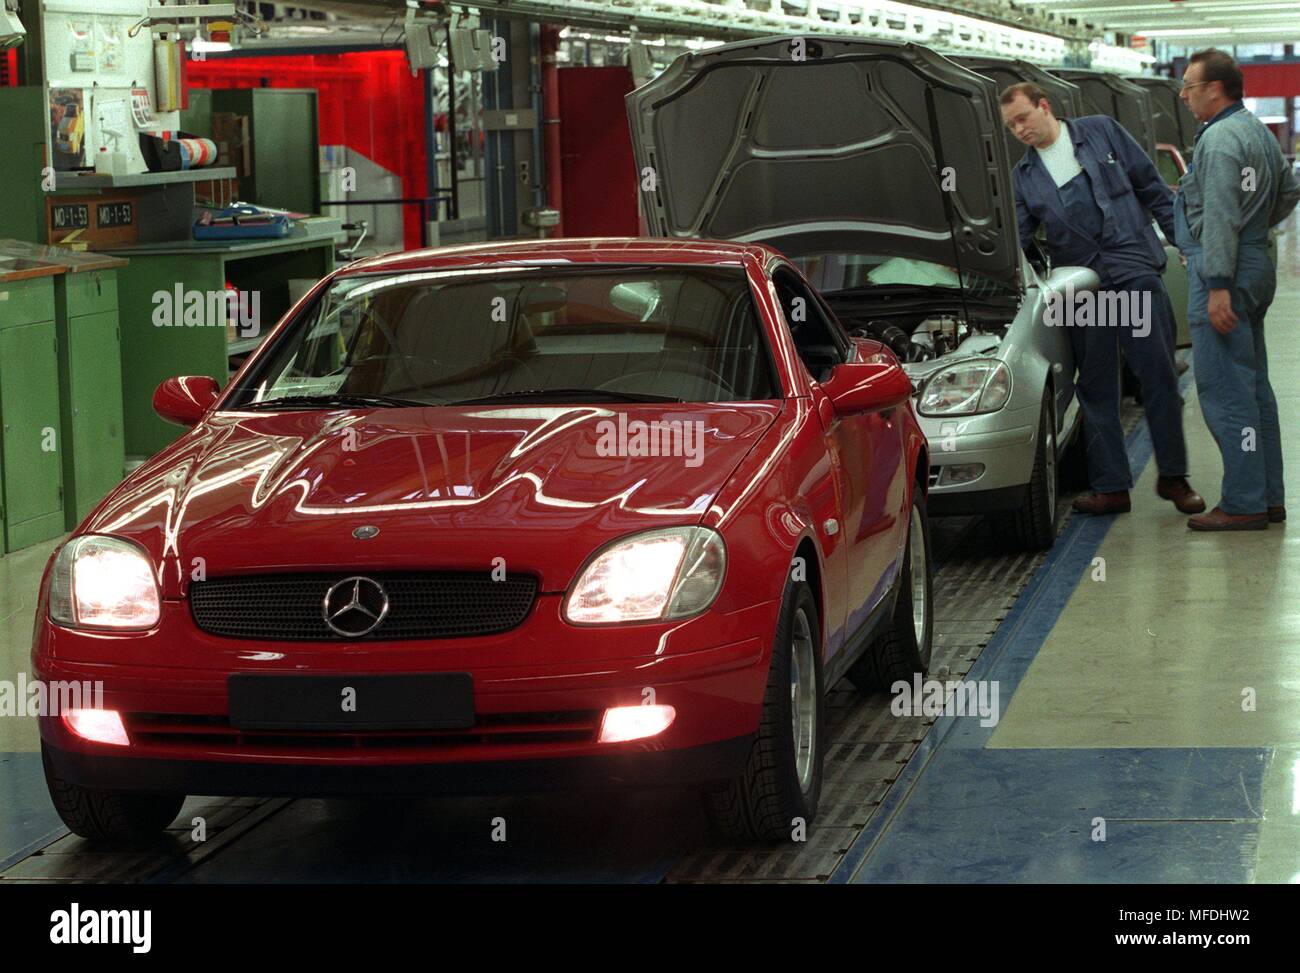 The first SLK sports cars for the series are currently being produced at the Mercedes-Benz plant in Bremen (recorded on 14.6.96). Every day, 14 two-seater roadsters with a sophisticated folding roof made of steel, which can be tilted out within 25 seconds at the touch of a button, are created here every day. The production of the SLK replaces the previously built T-model in Bremen and secures 1,500 of the total of 13,586 jobs of the largest private employer in the state of Bremen. The delivery of the Flitzer is scheduled for 14 September. The four-meter-long sports car gives it with 136 or 193 Stock Photo